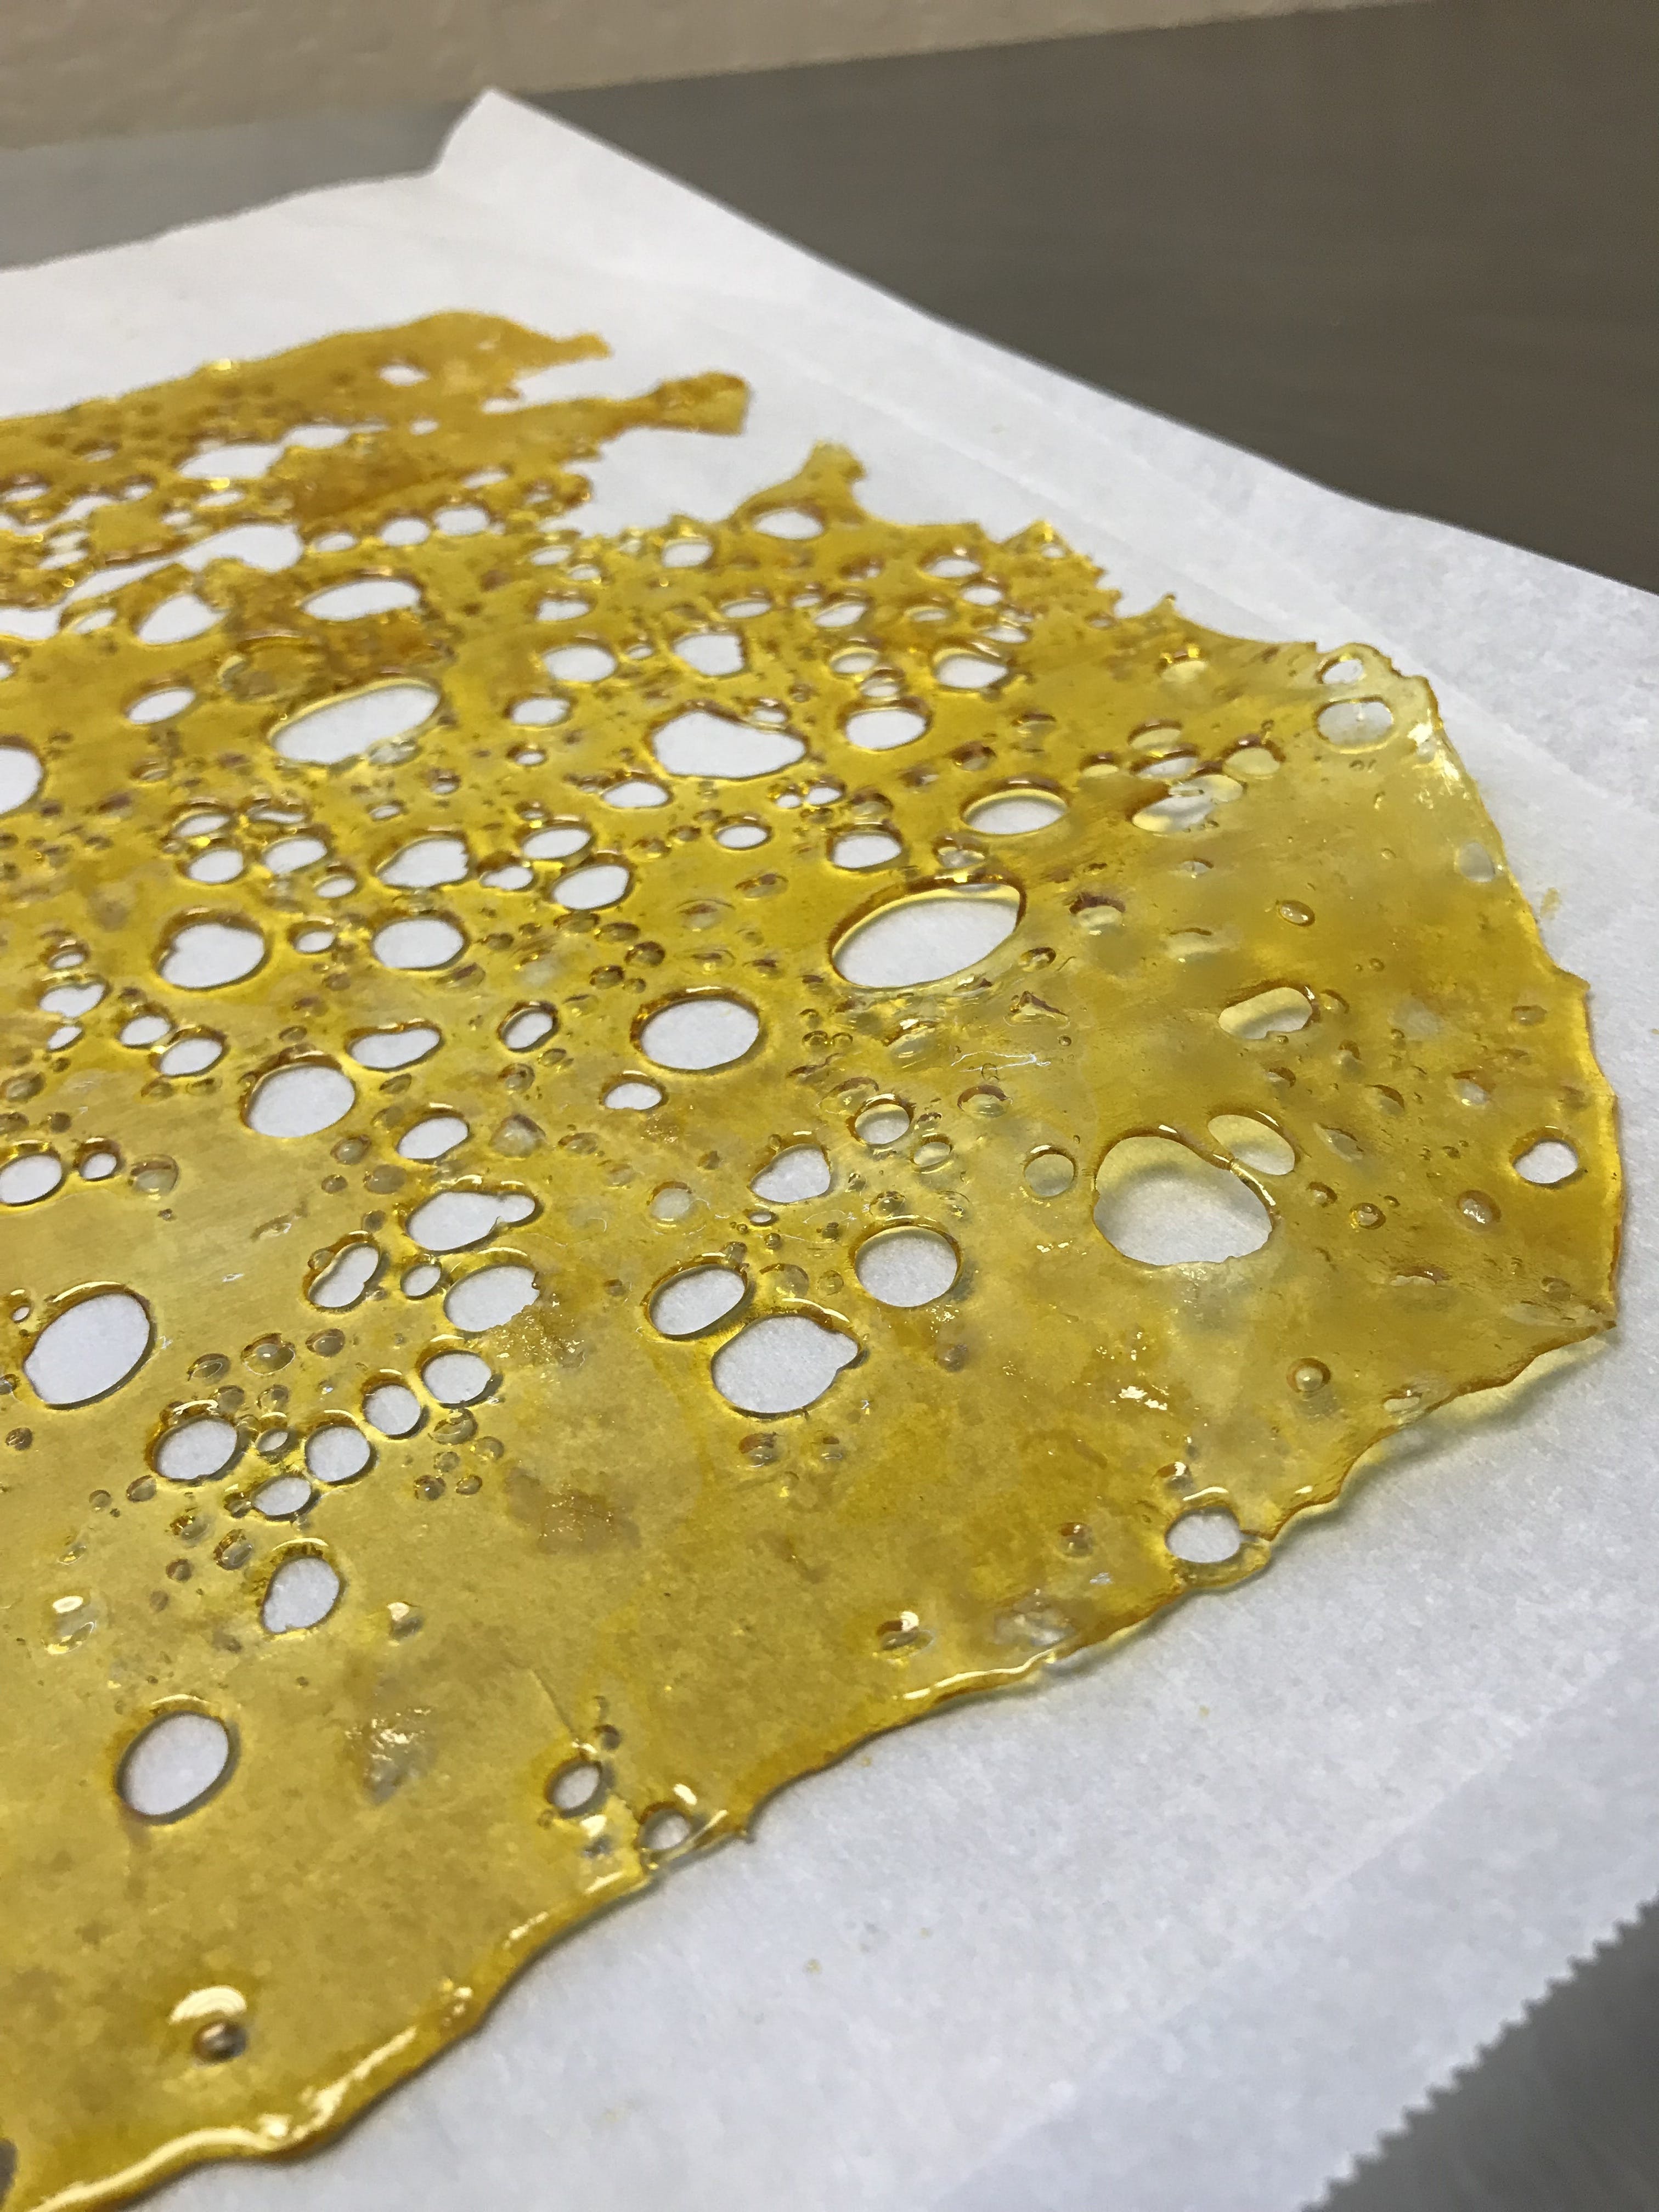 wax-sweet-science-shatter-tier-1-grape-lime-ricky